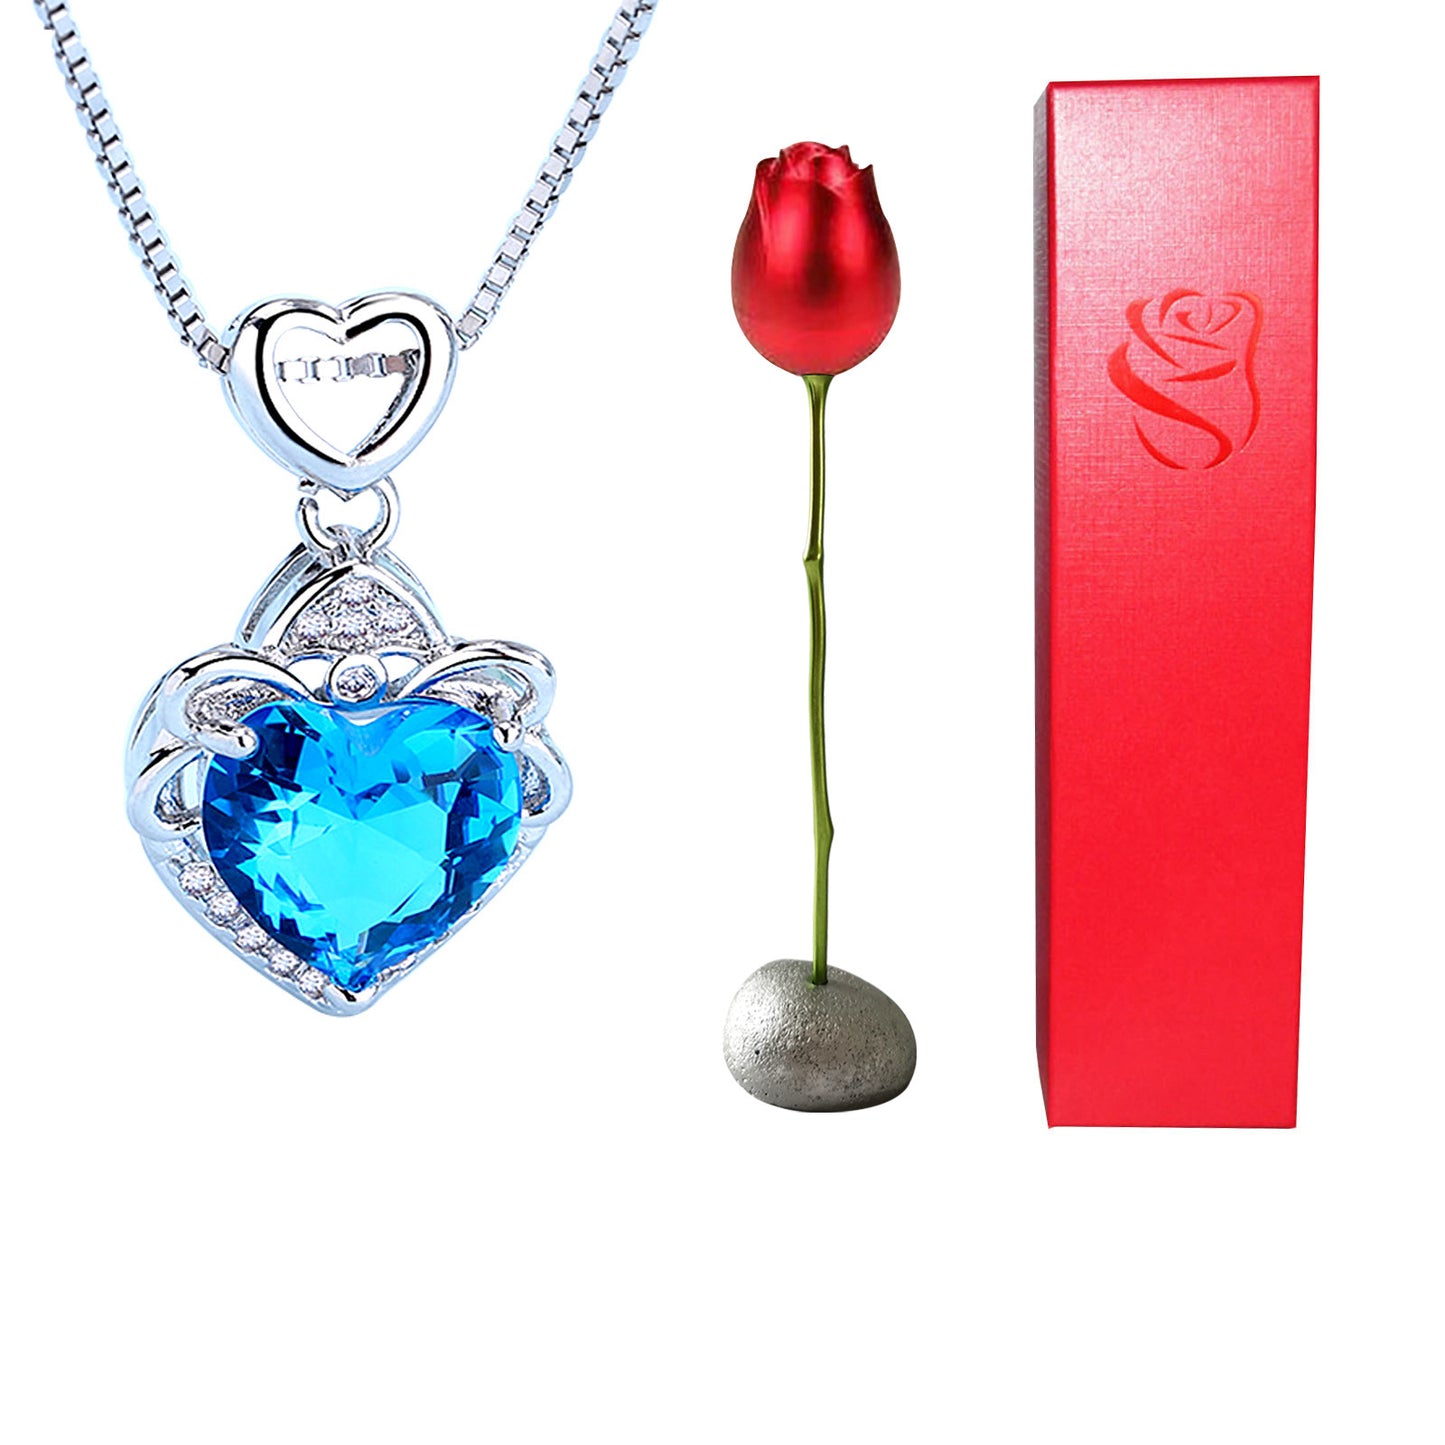 Surprise!! Heart shaped pendant delivered in a Rose flower